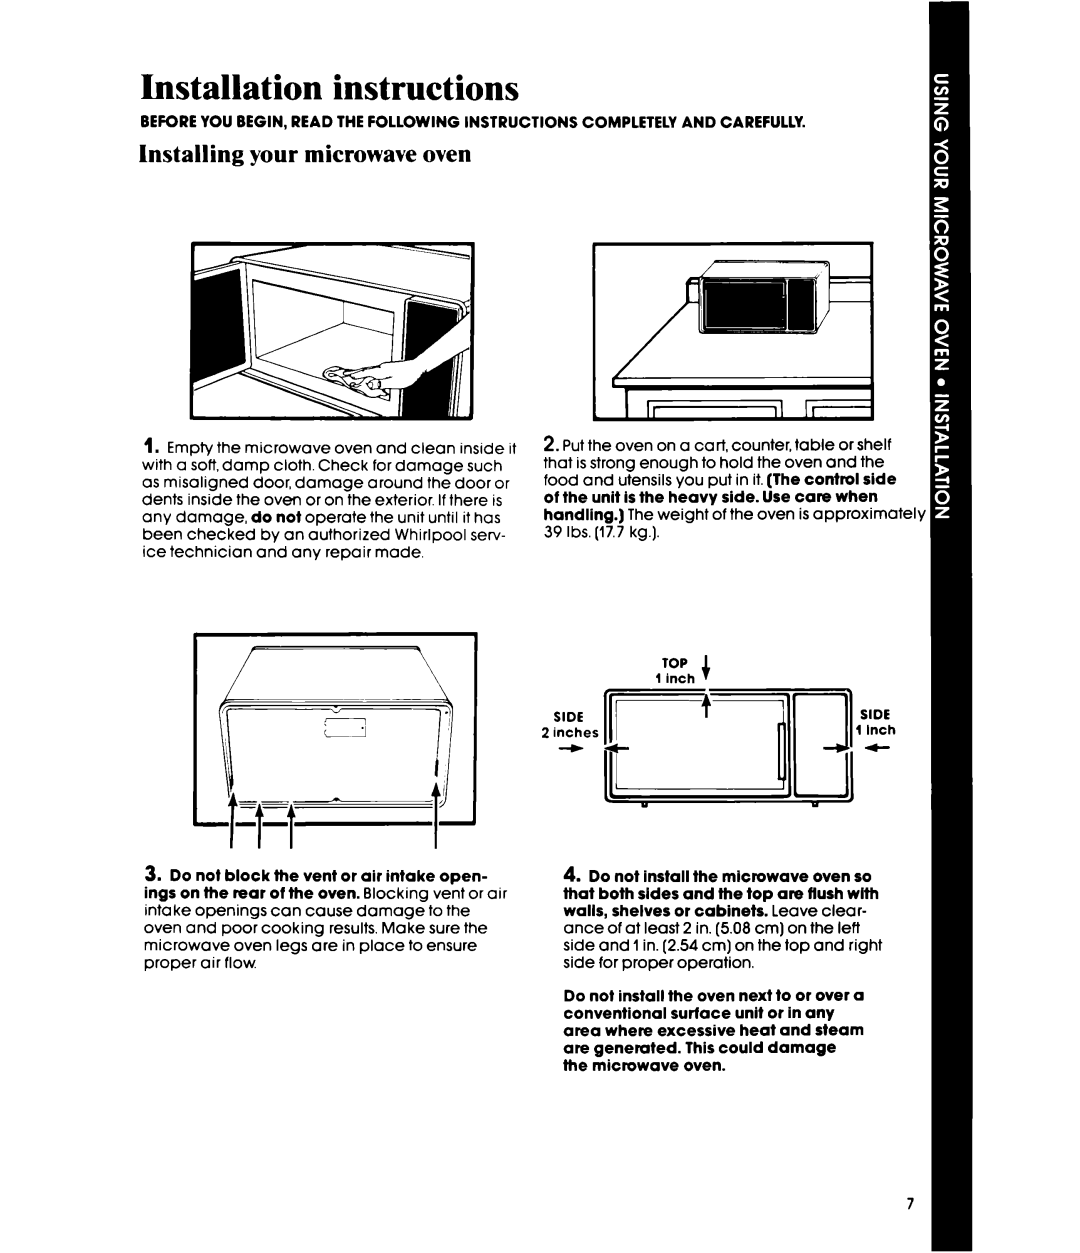 Whirlpool MW3OOOXP manual Installation instructions, Installing your microwave oven 